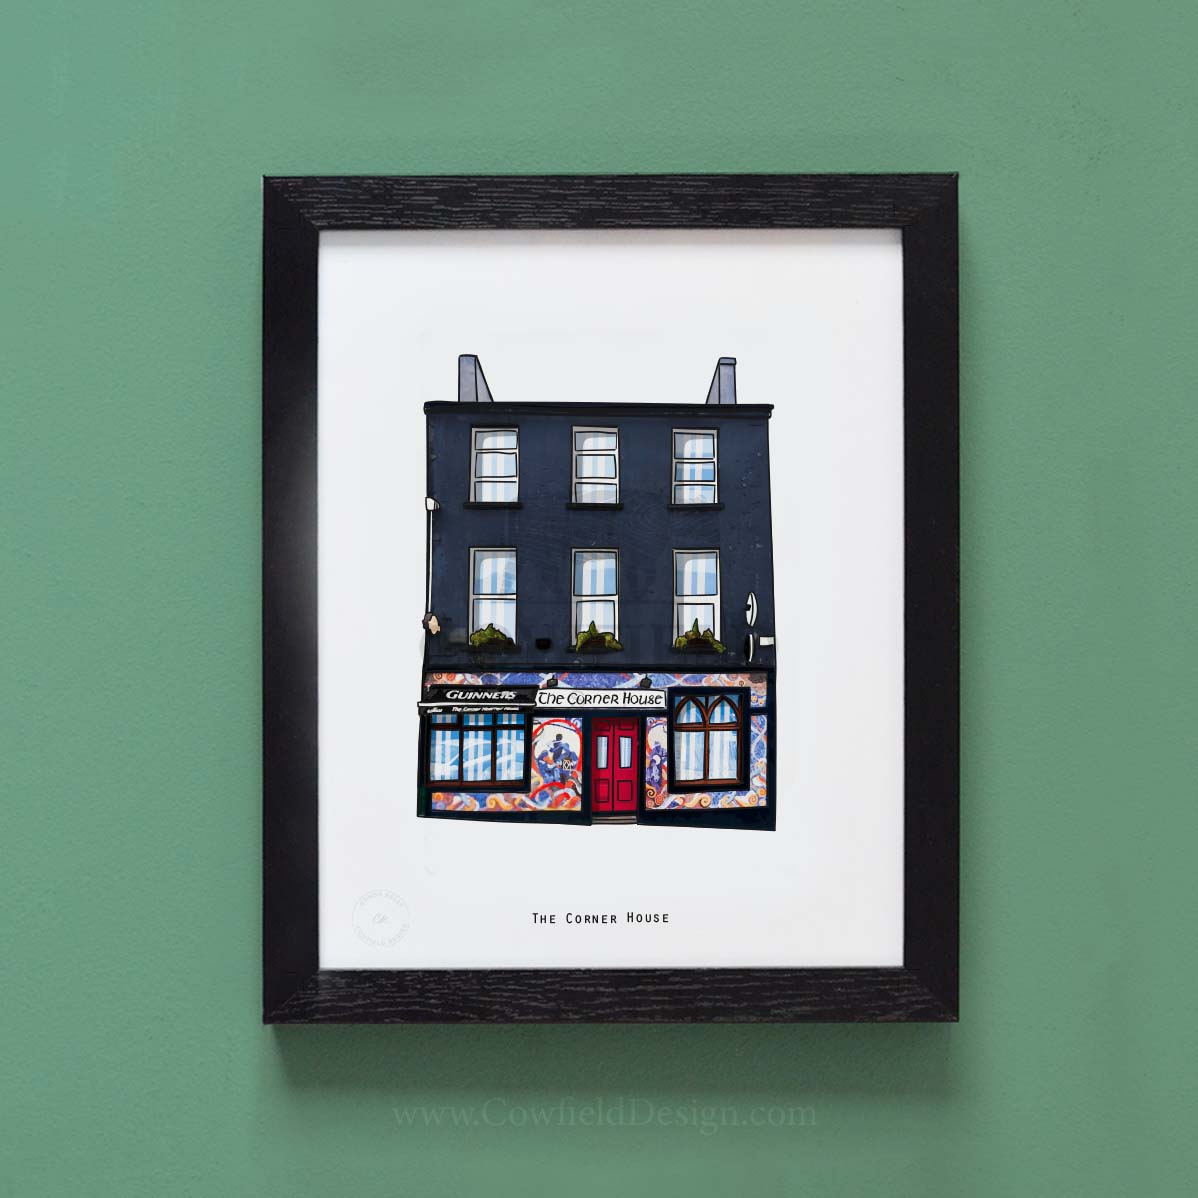 the Corner House Illustrated Pubs of Cork